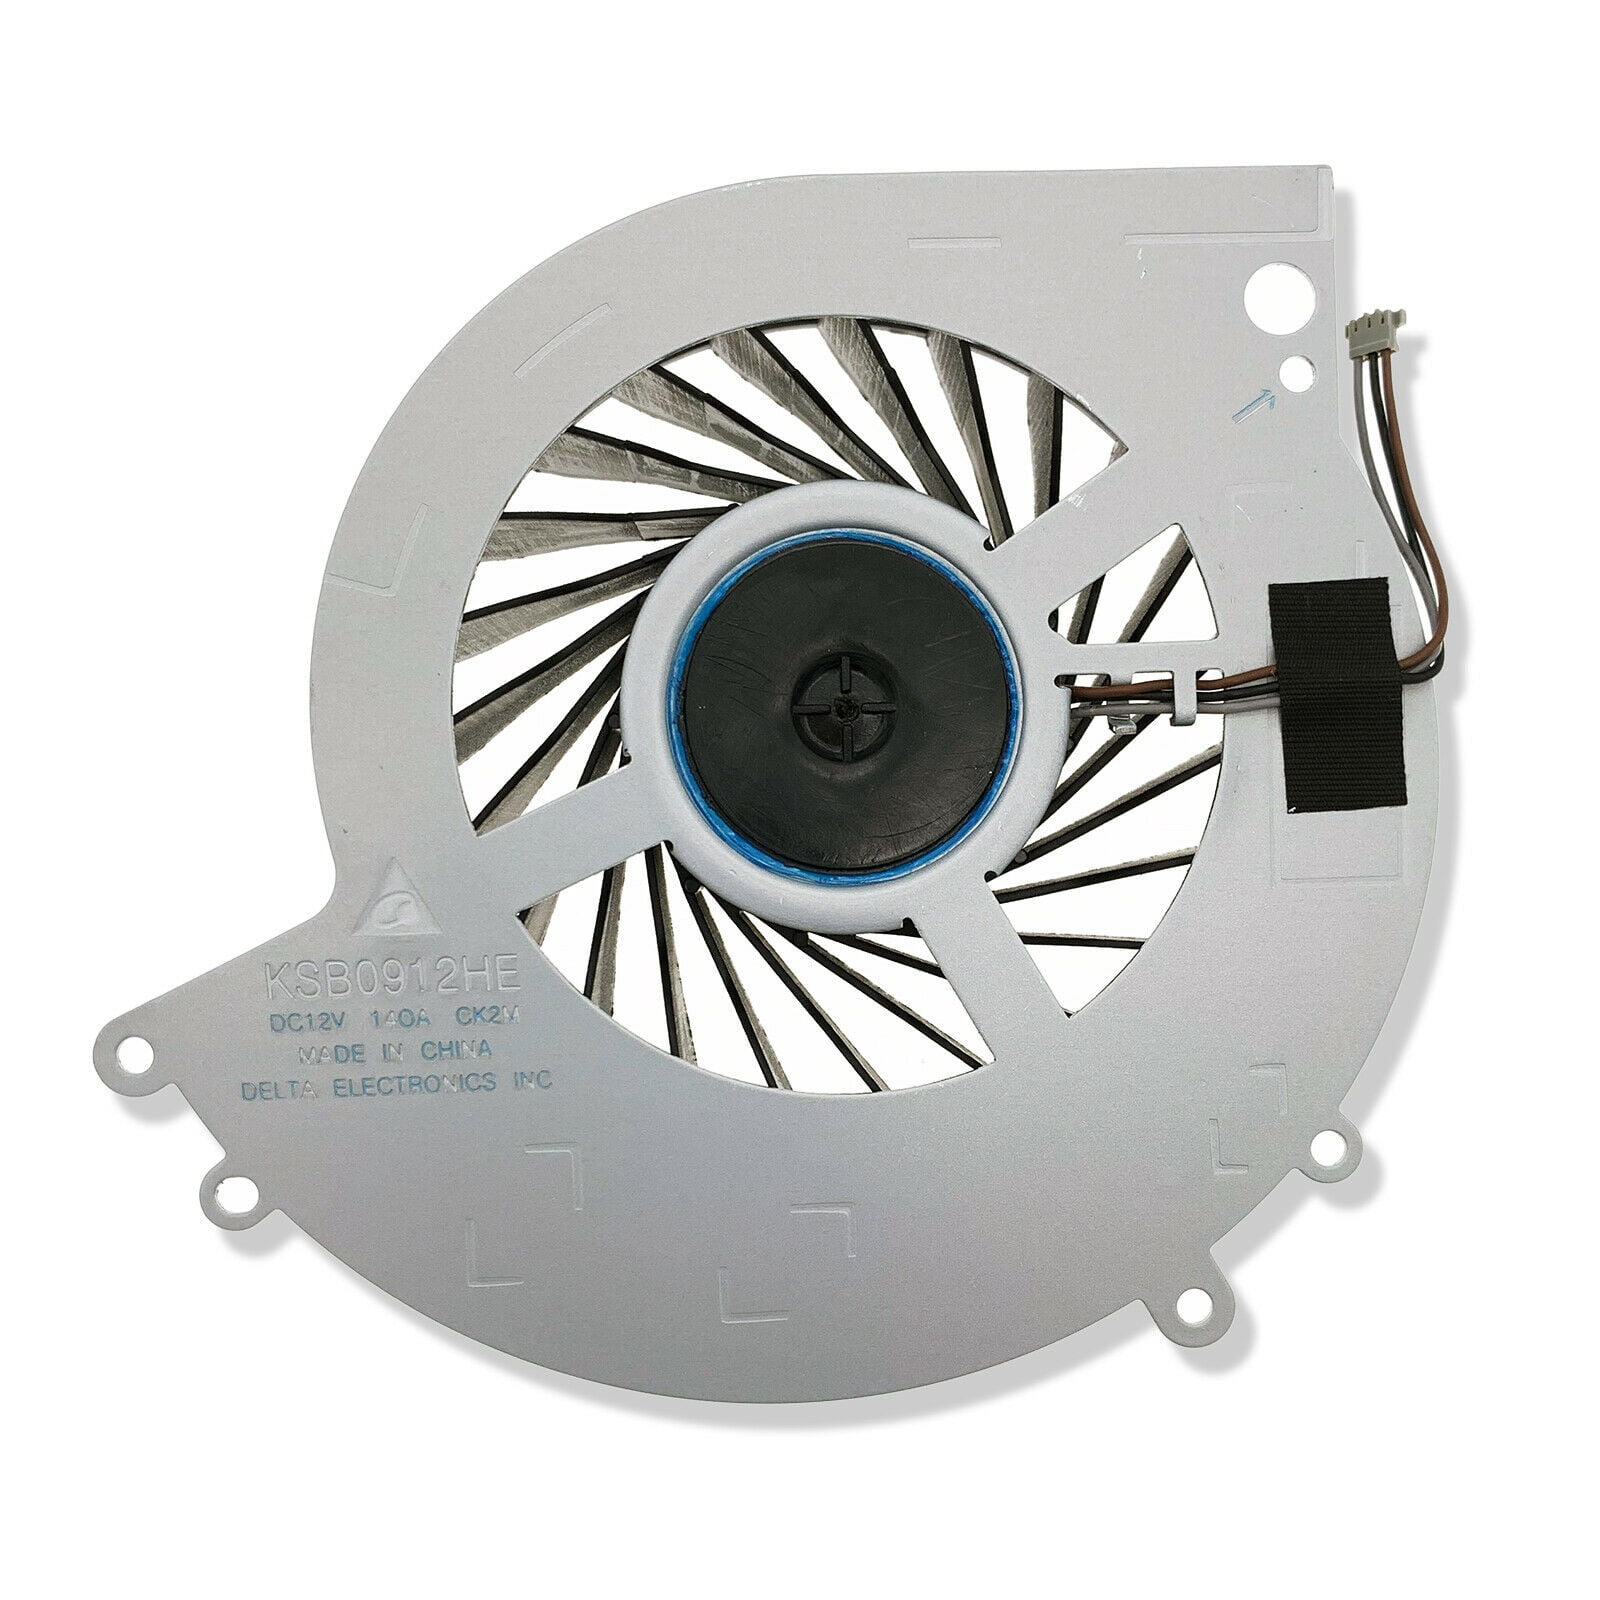 ubehageligt Stedord føderation New Internal Cooling Fan Replacement Repair For Sony PS4 CUH-1115A 500GB -  Walmart.com